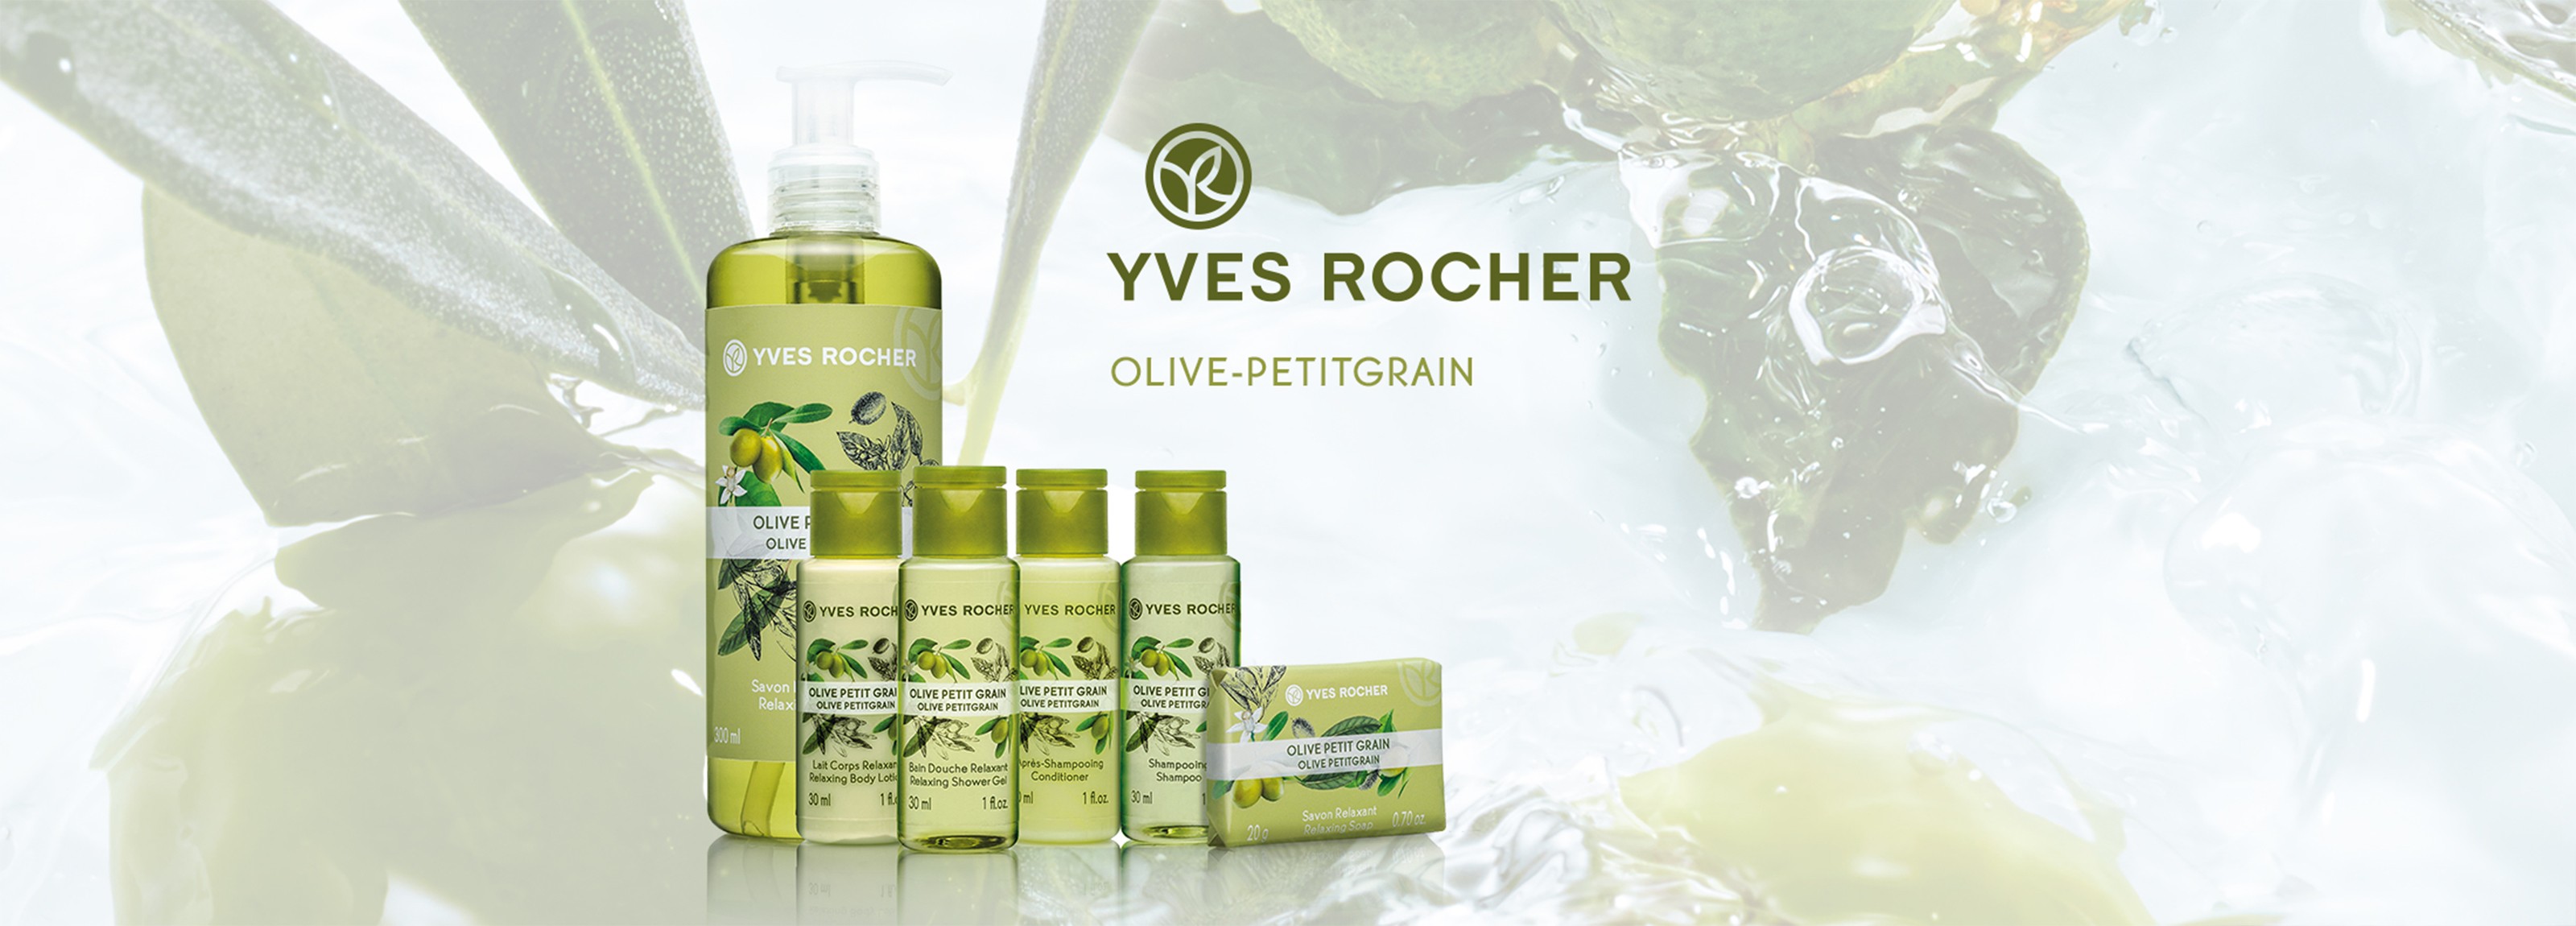 Yves Rocher bathroom products